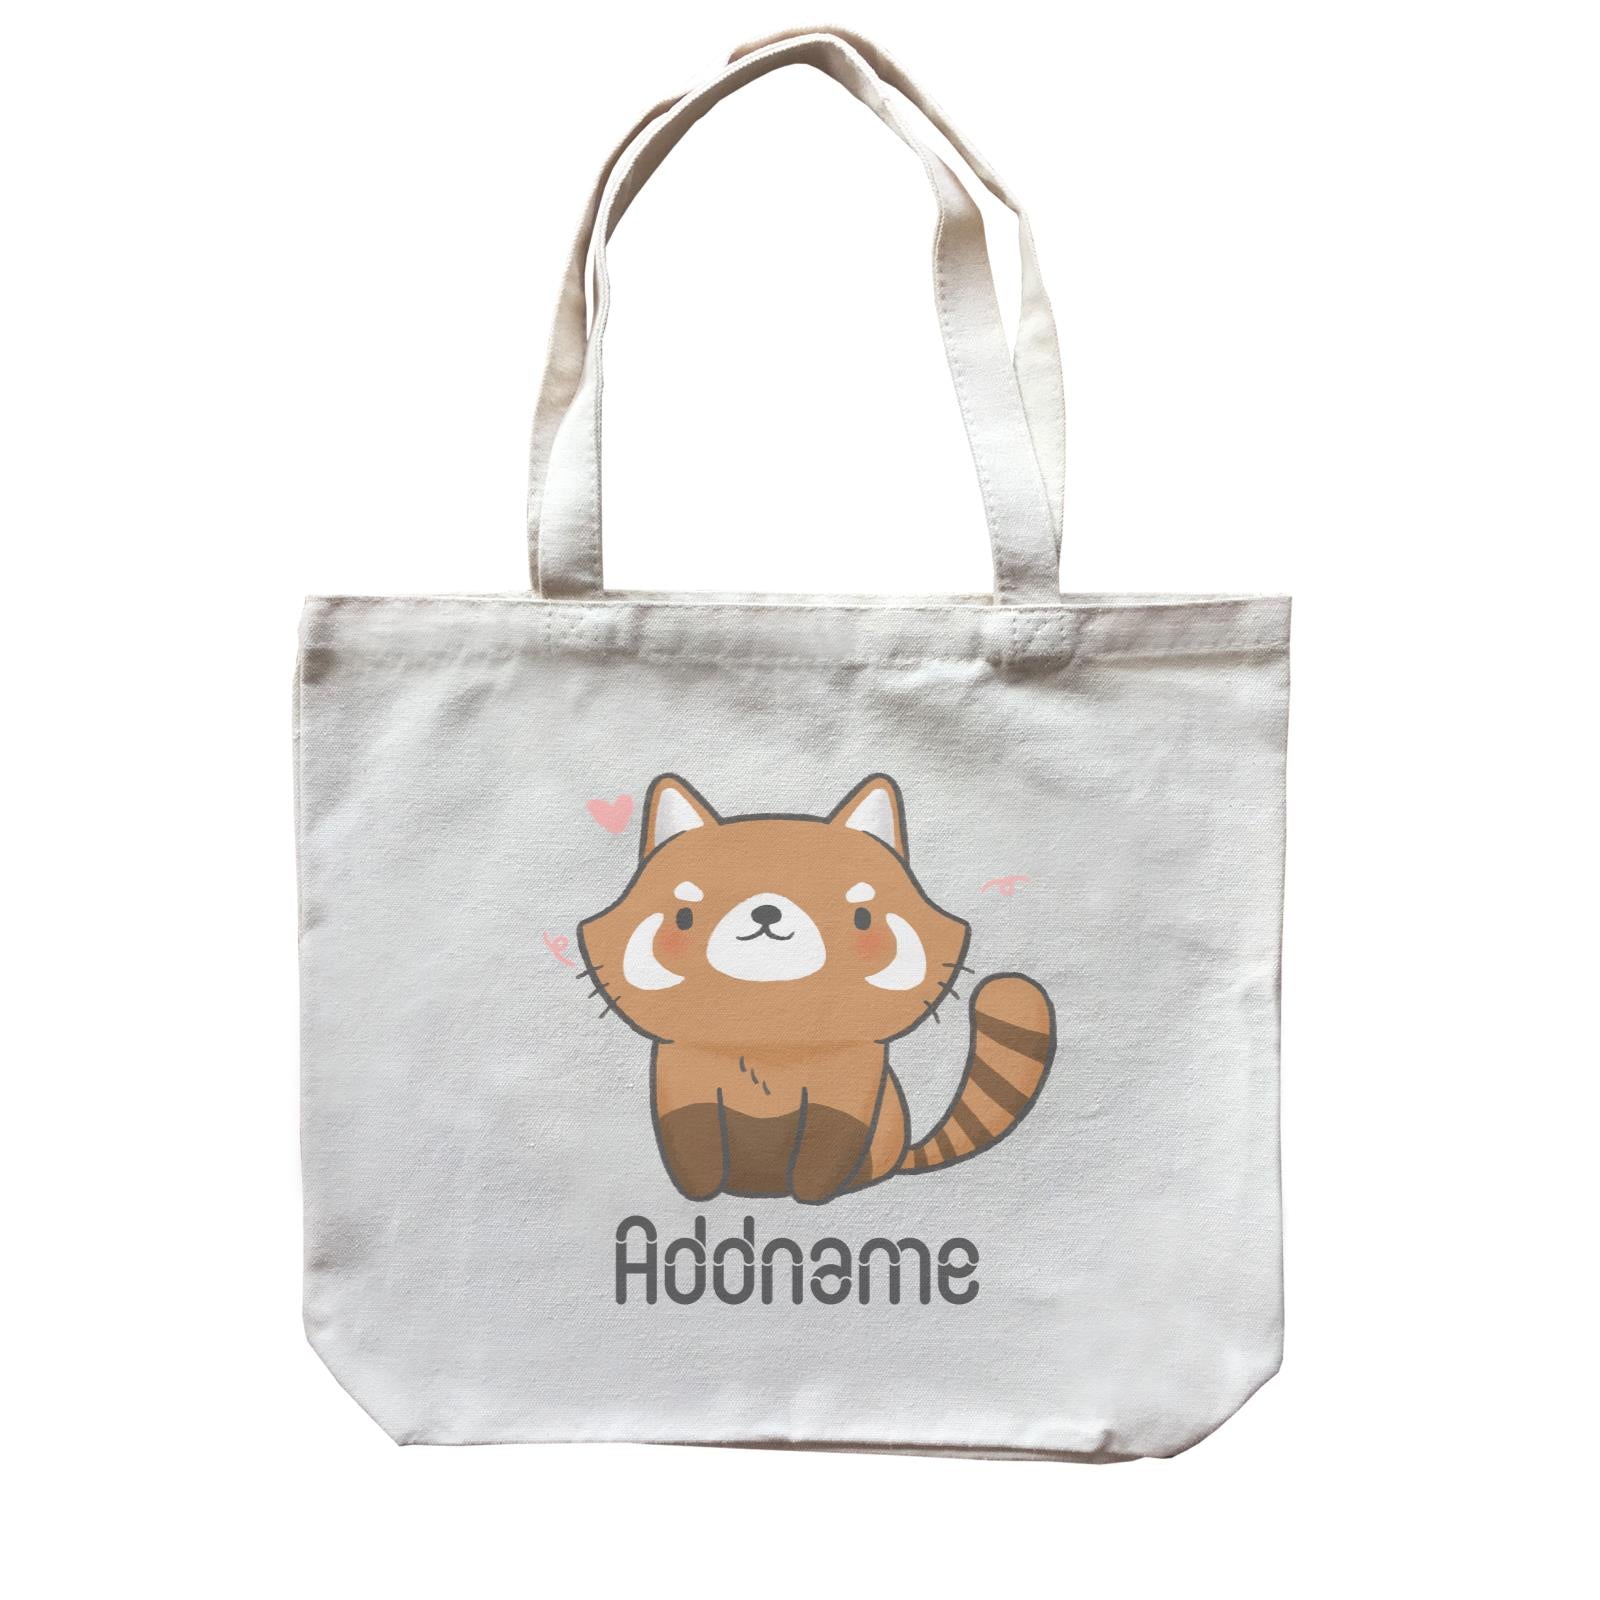 Cute Hand Drawn Style Red Panda Addname Canvas Bag